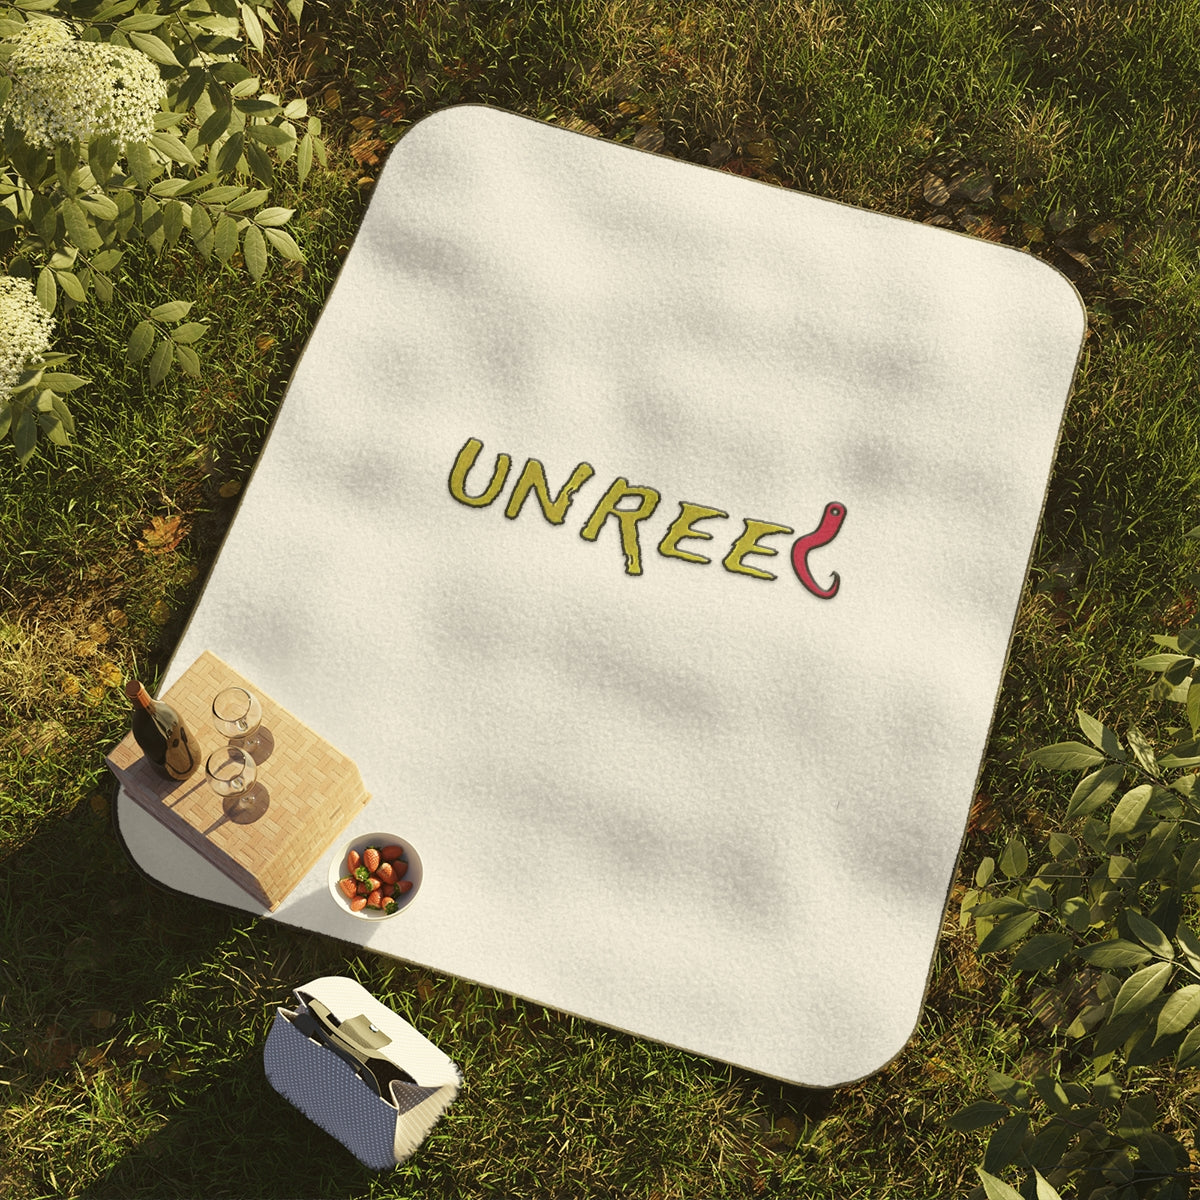 Picnic Blanket - Unreel Clothes for fishing and the outdoors.